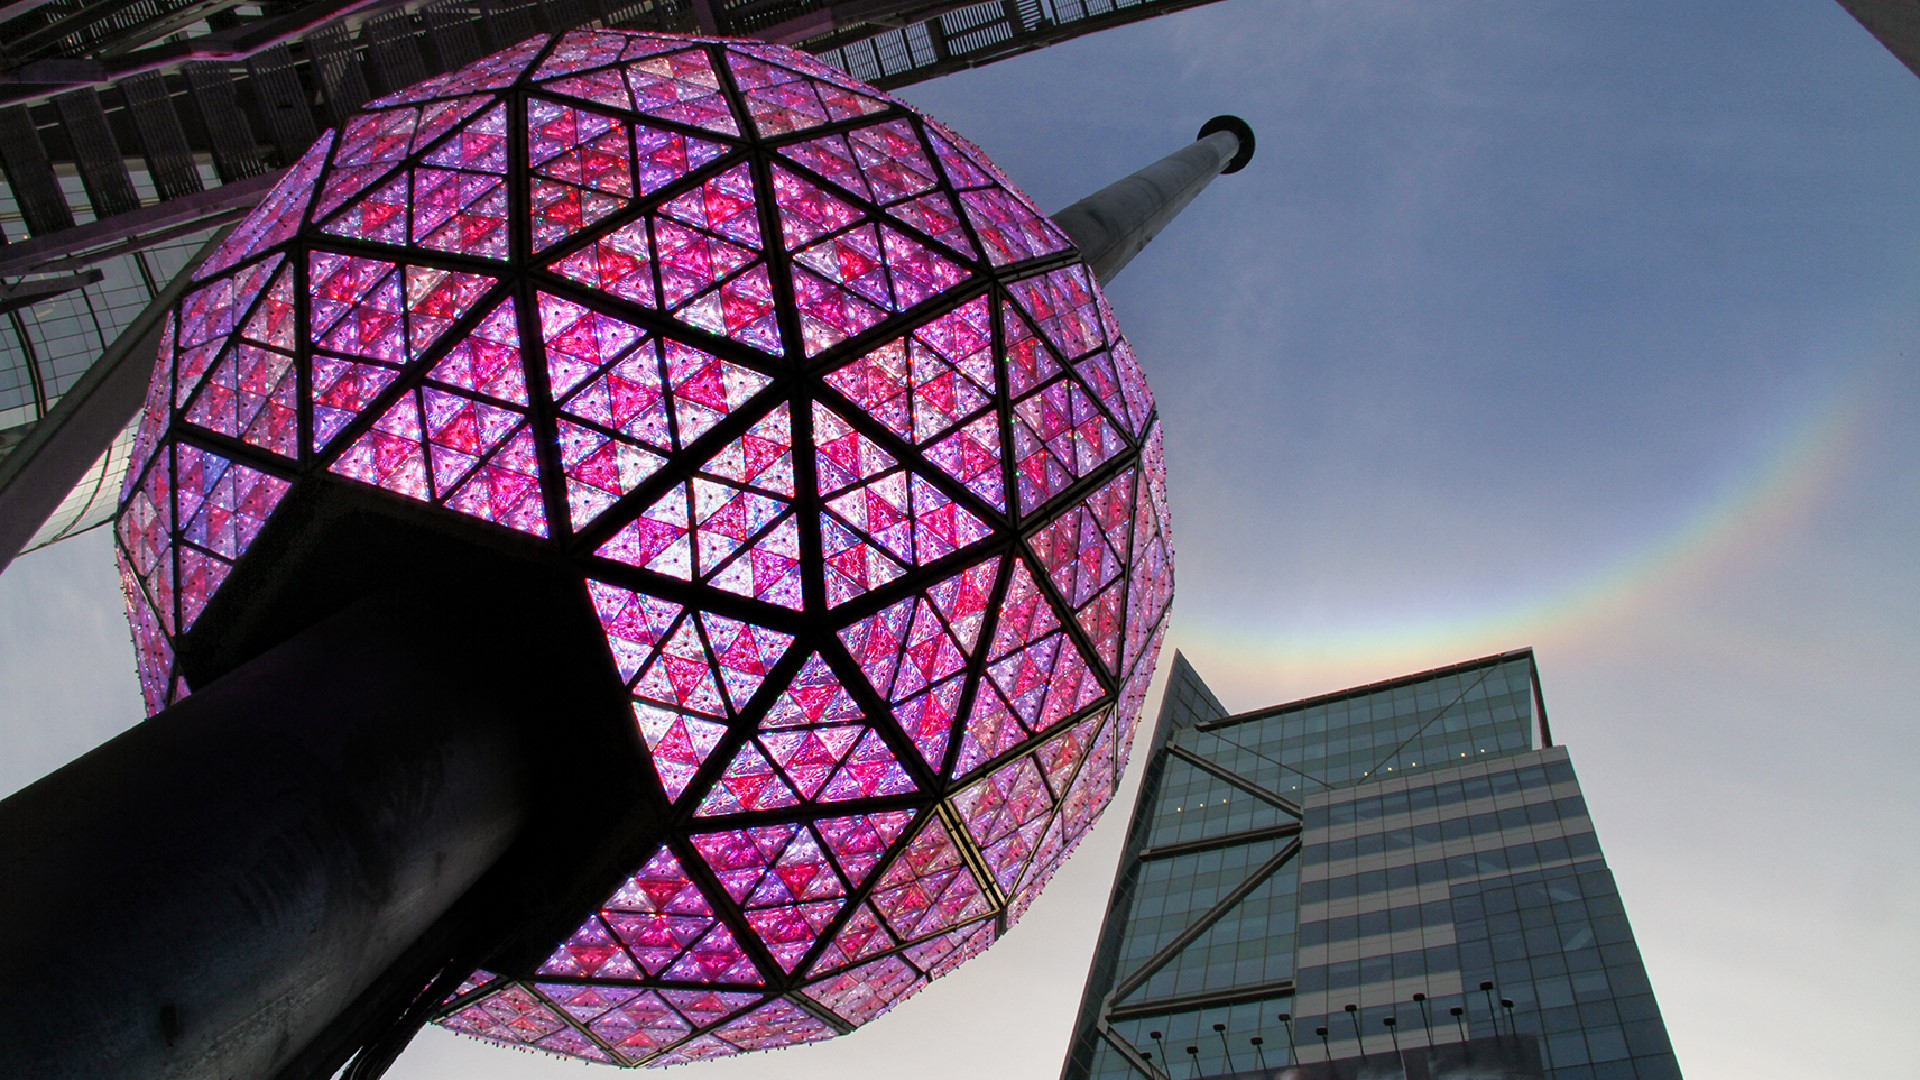 Times Square’s New Year’s Eve ball, glowing pink, waits to be hoisted into the air above the city’s skyscrapers.